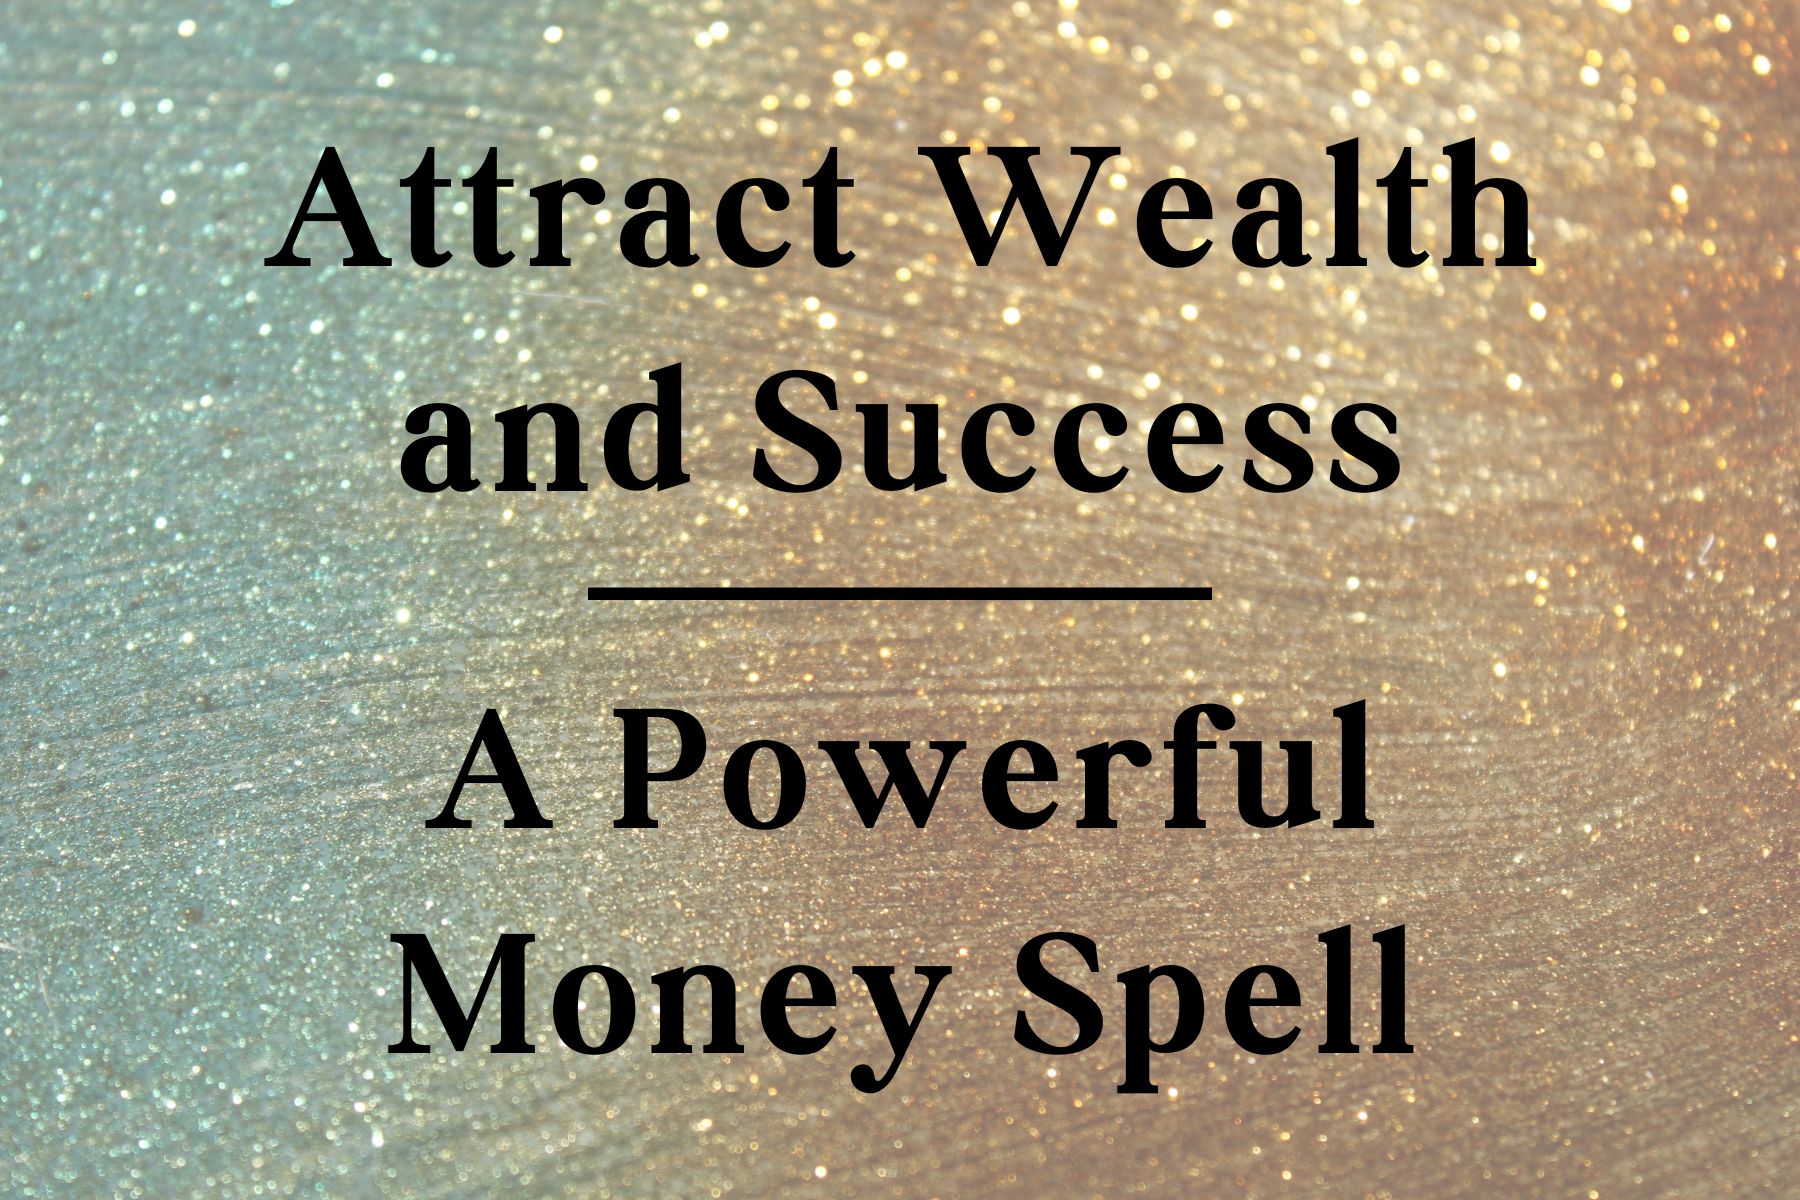 Attract Wealth and Success: A Powerful Money Spell